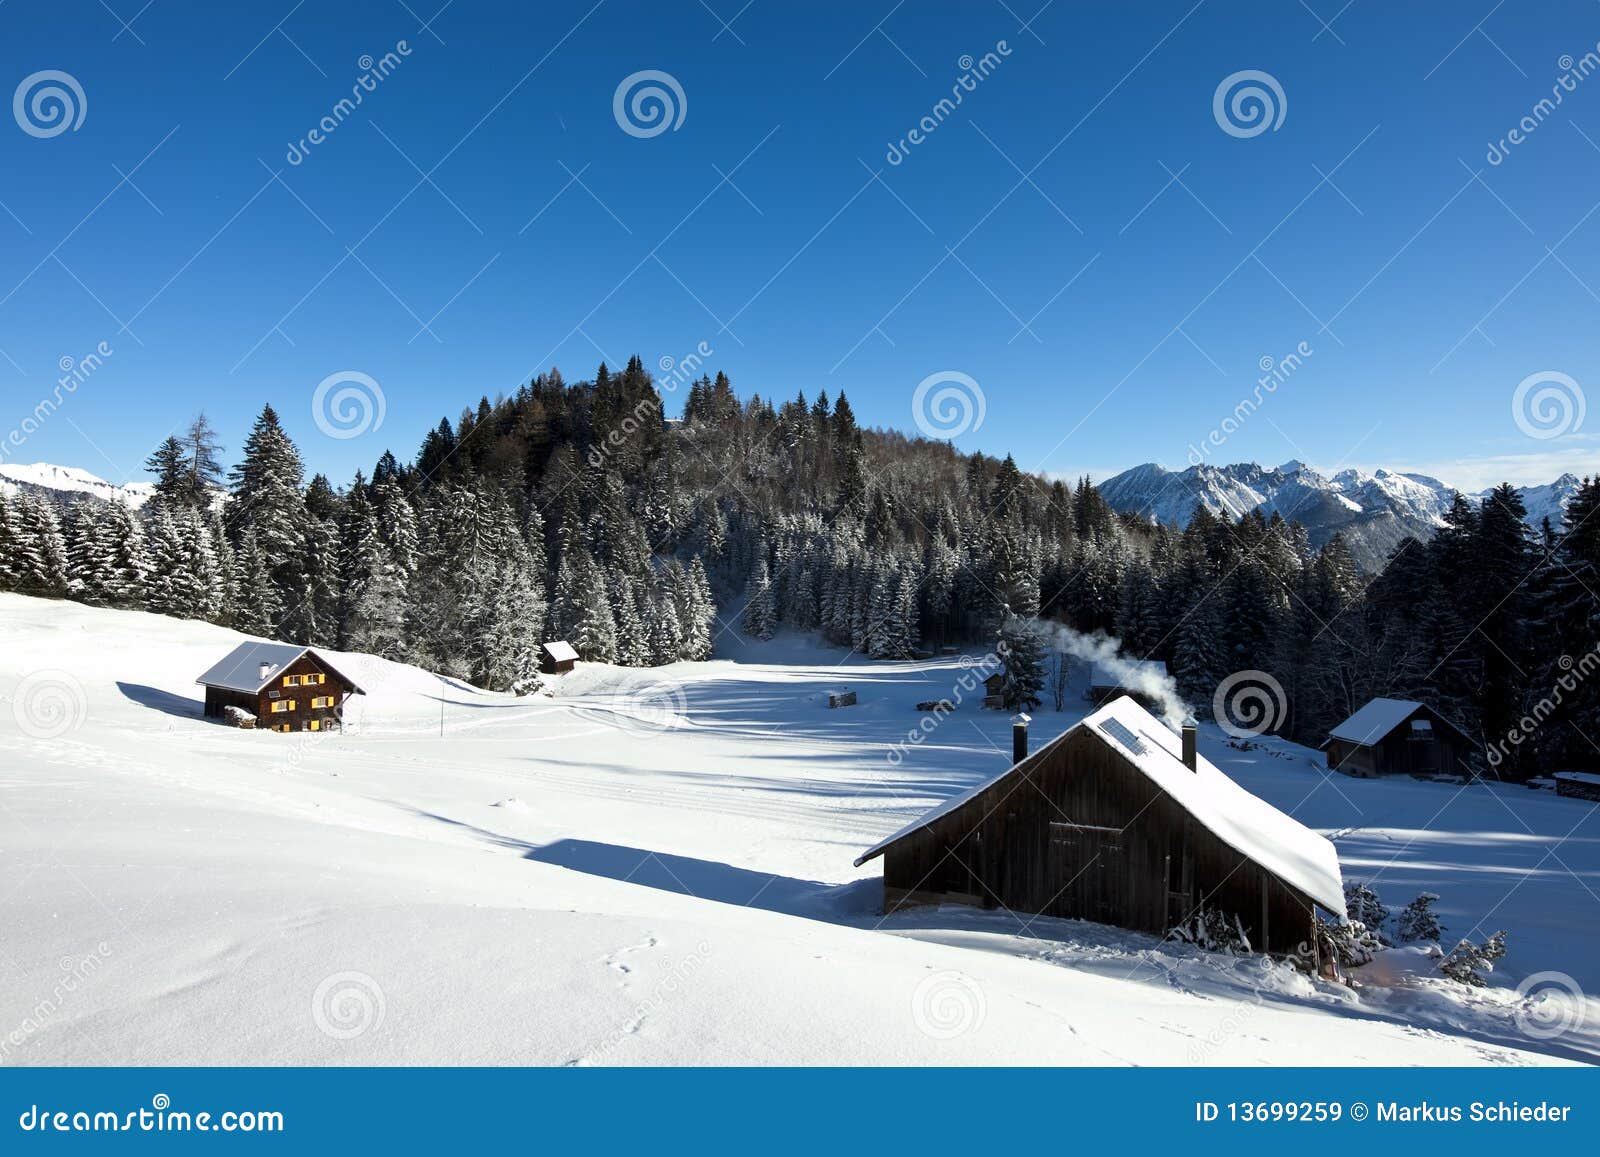 ... sunny winter landscape with occupied log cabins in the mountains